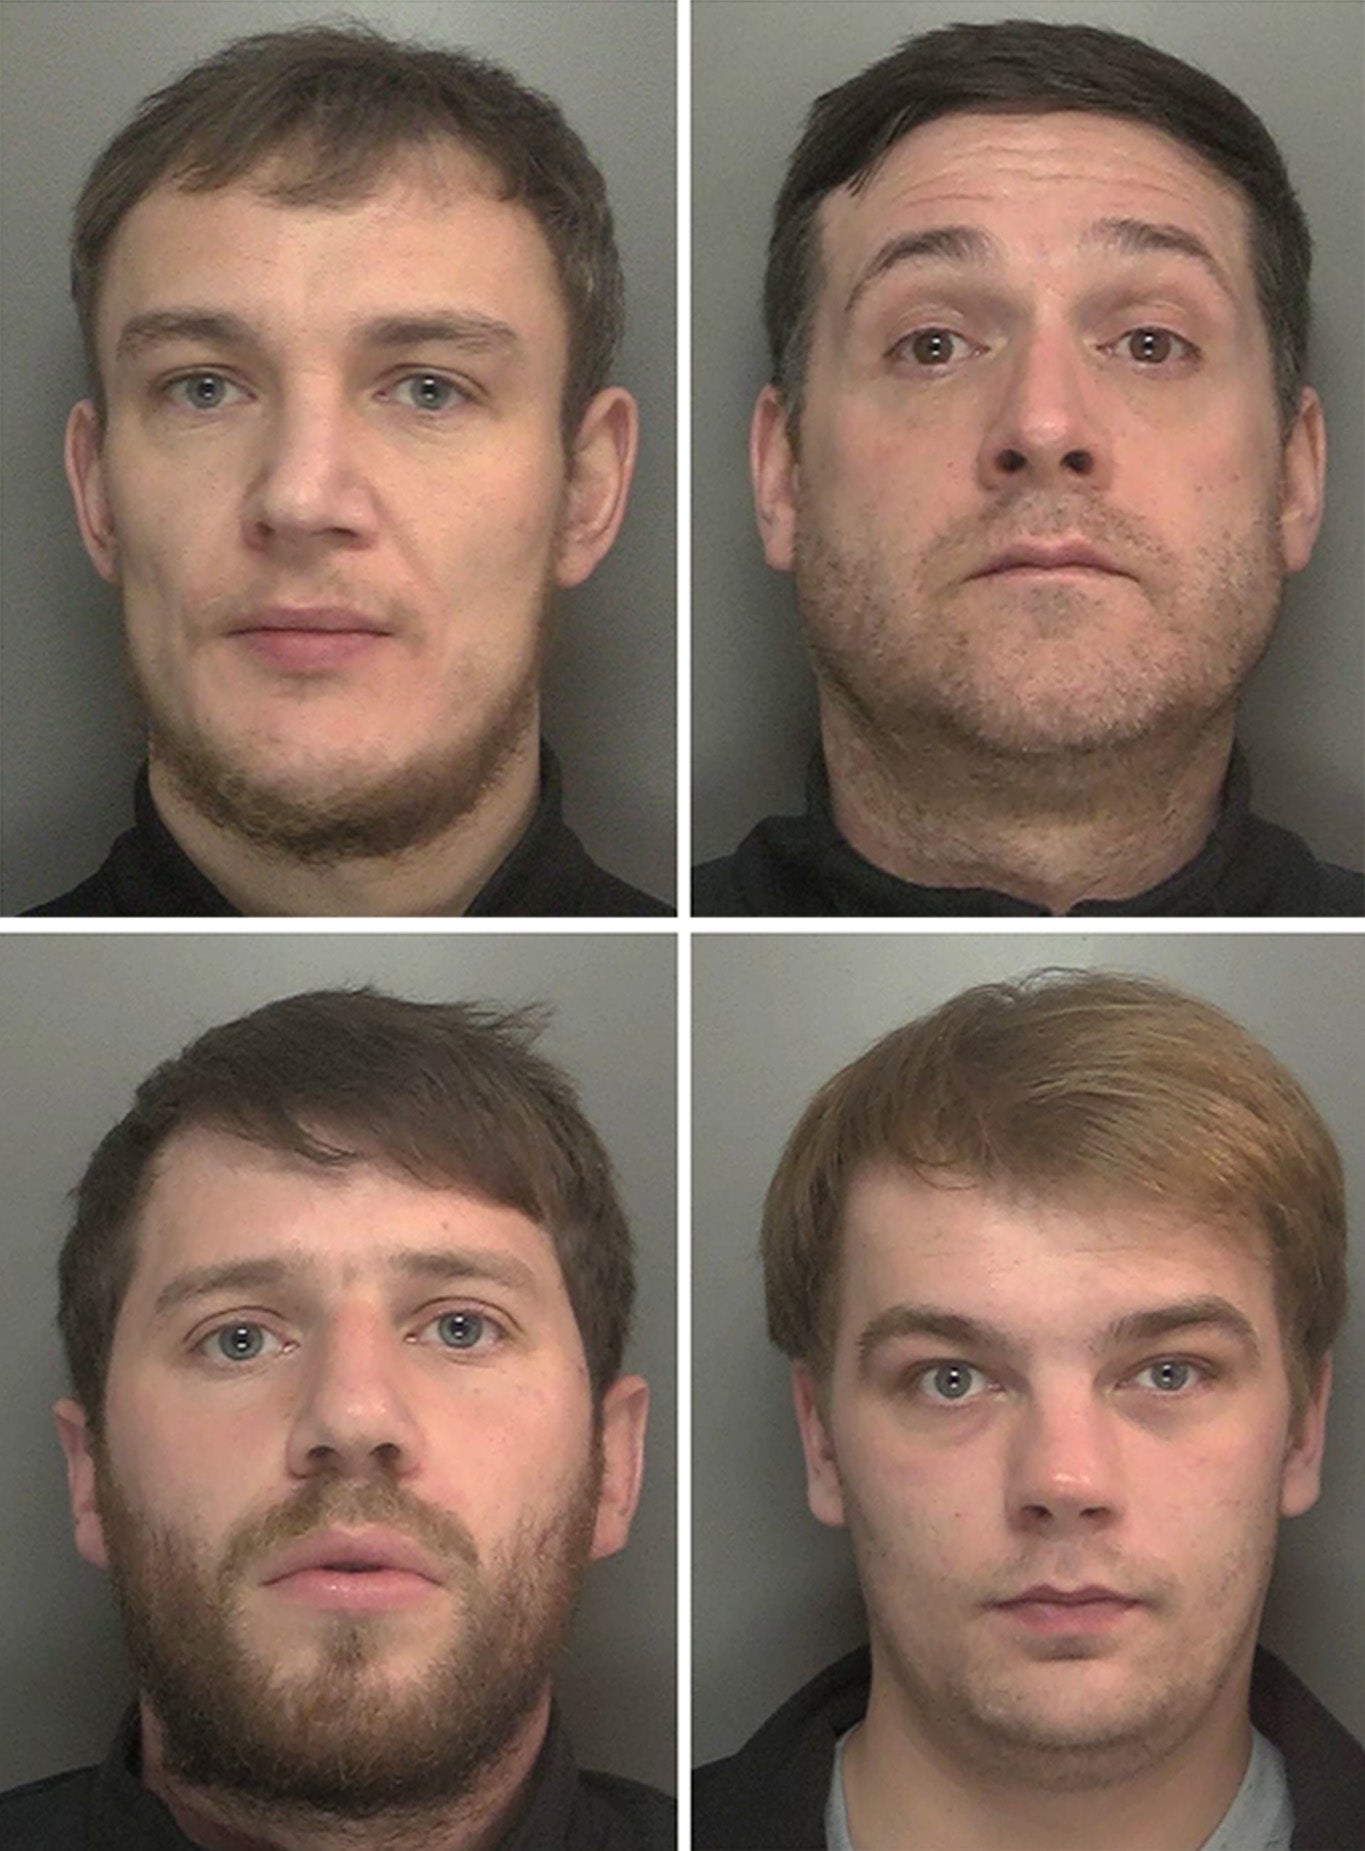 murder, liverpool crown court, liverpool, shooting, court, sentencing, ashley dale: four men jailed for more than 170 years after council worker ‘executed’ in her own home